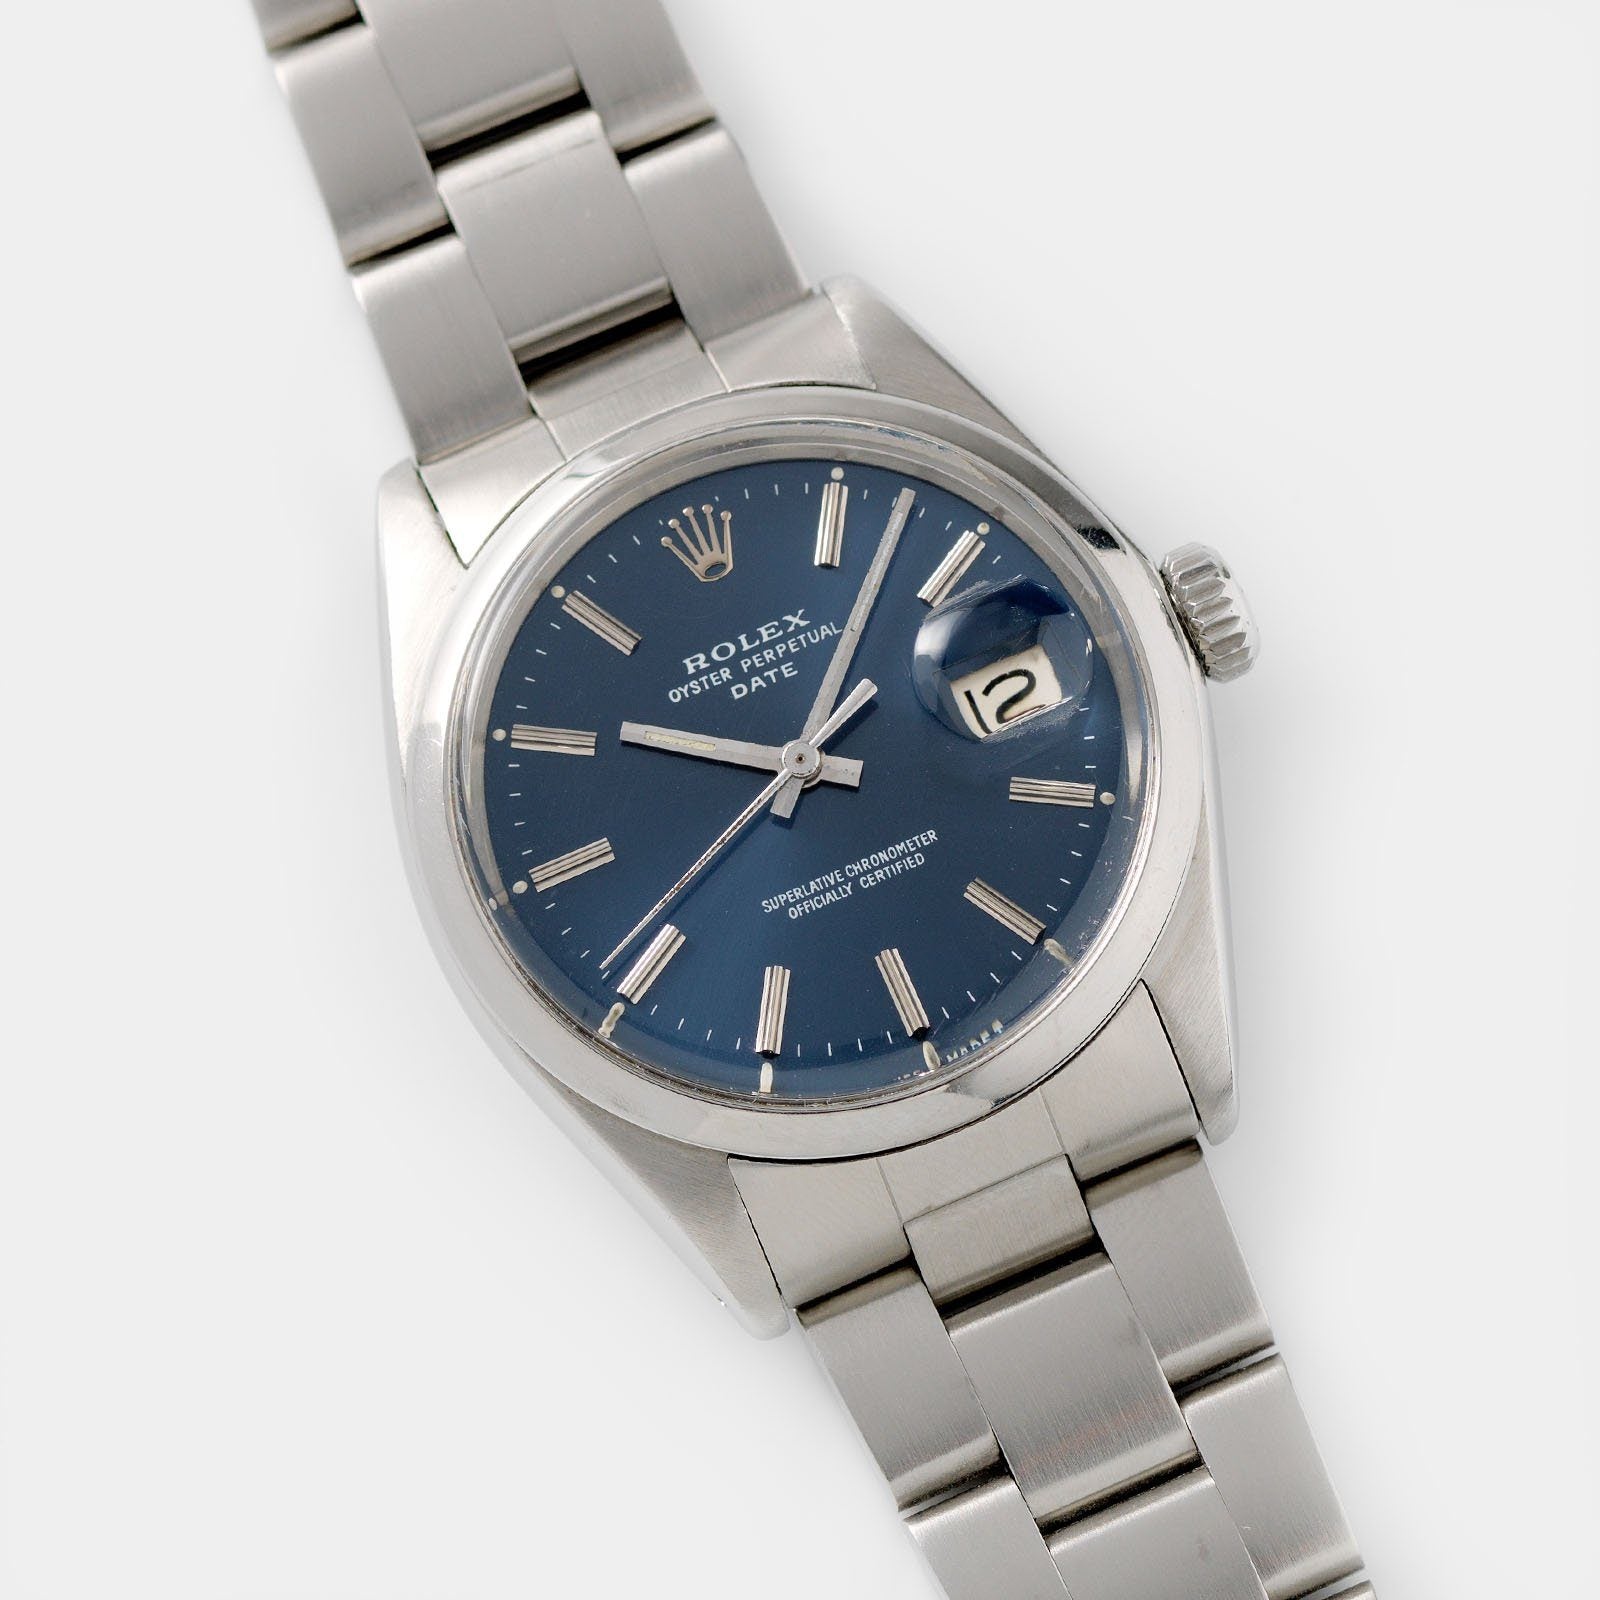 Rolex OP Date Reference 1500 Blue Dial with 34mm steel case